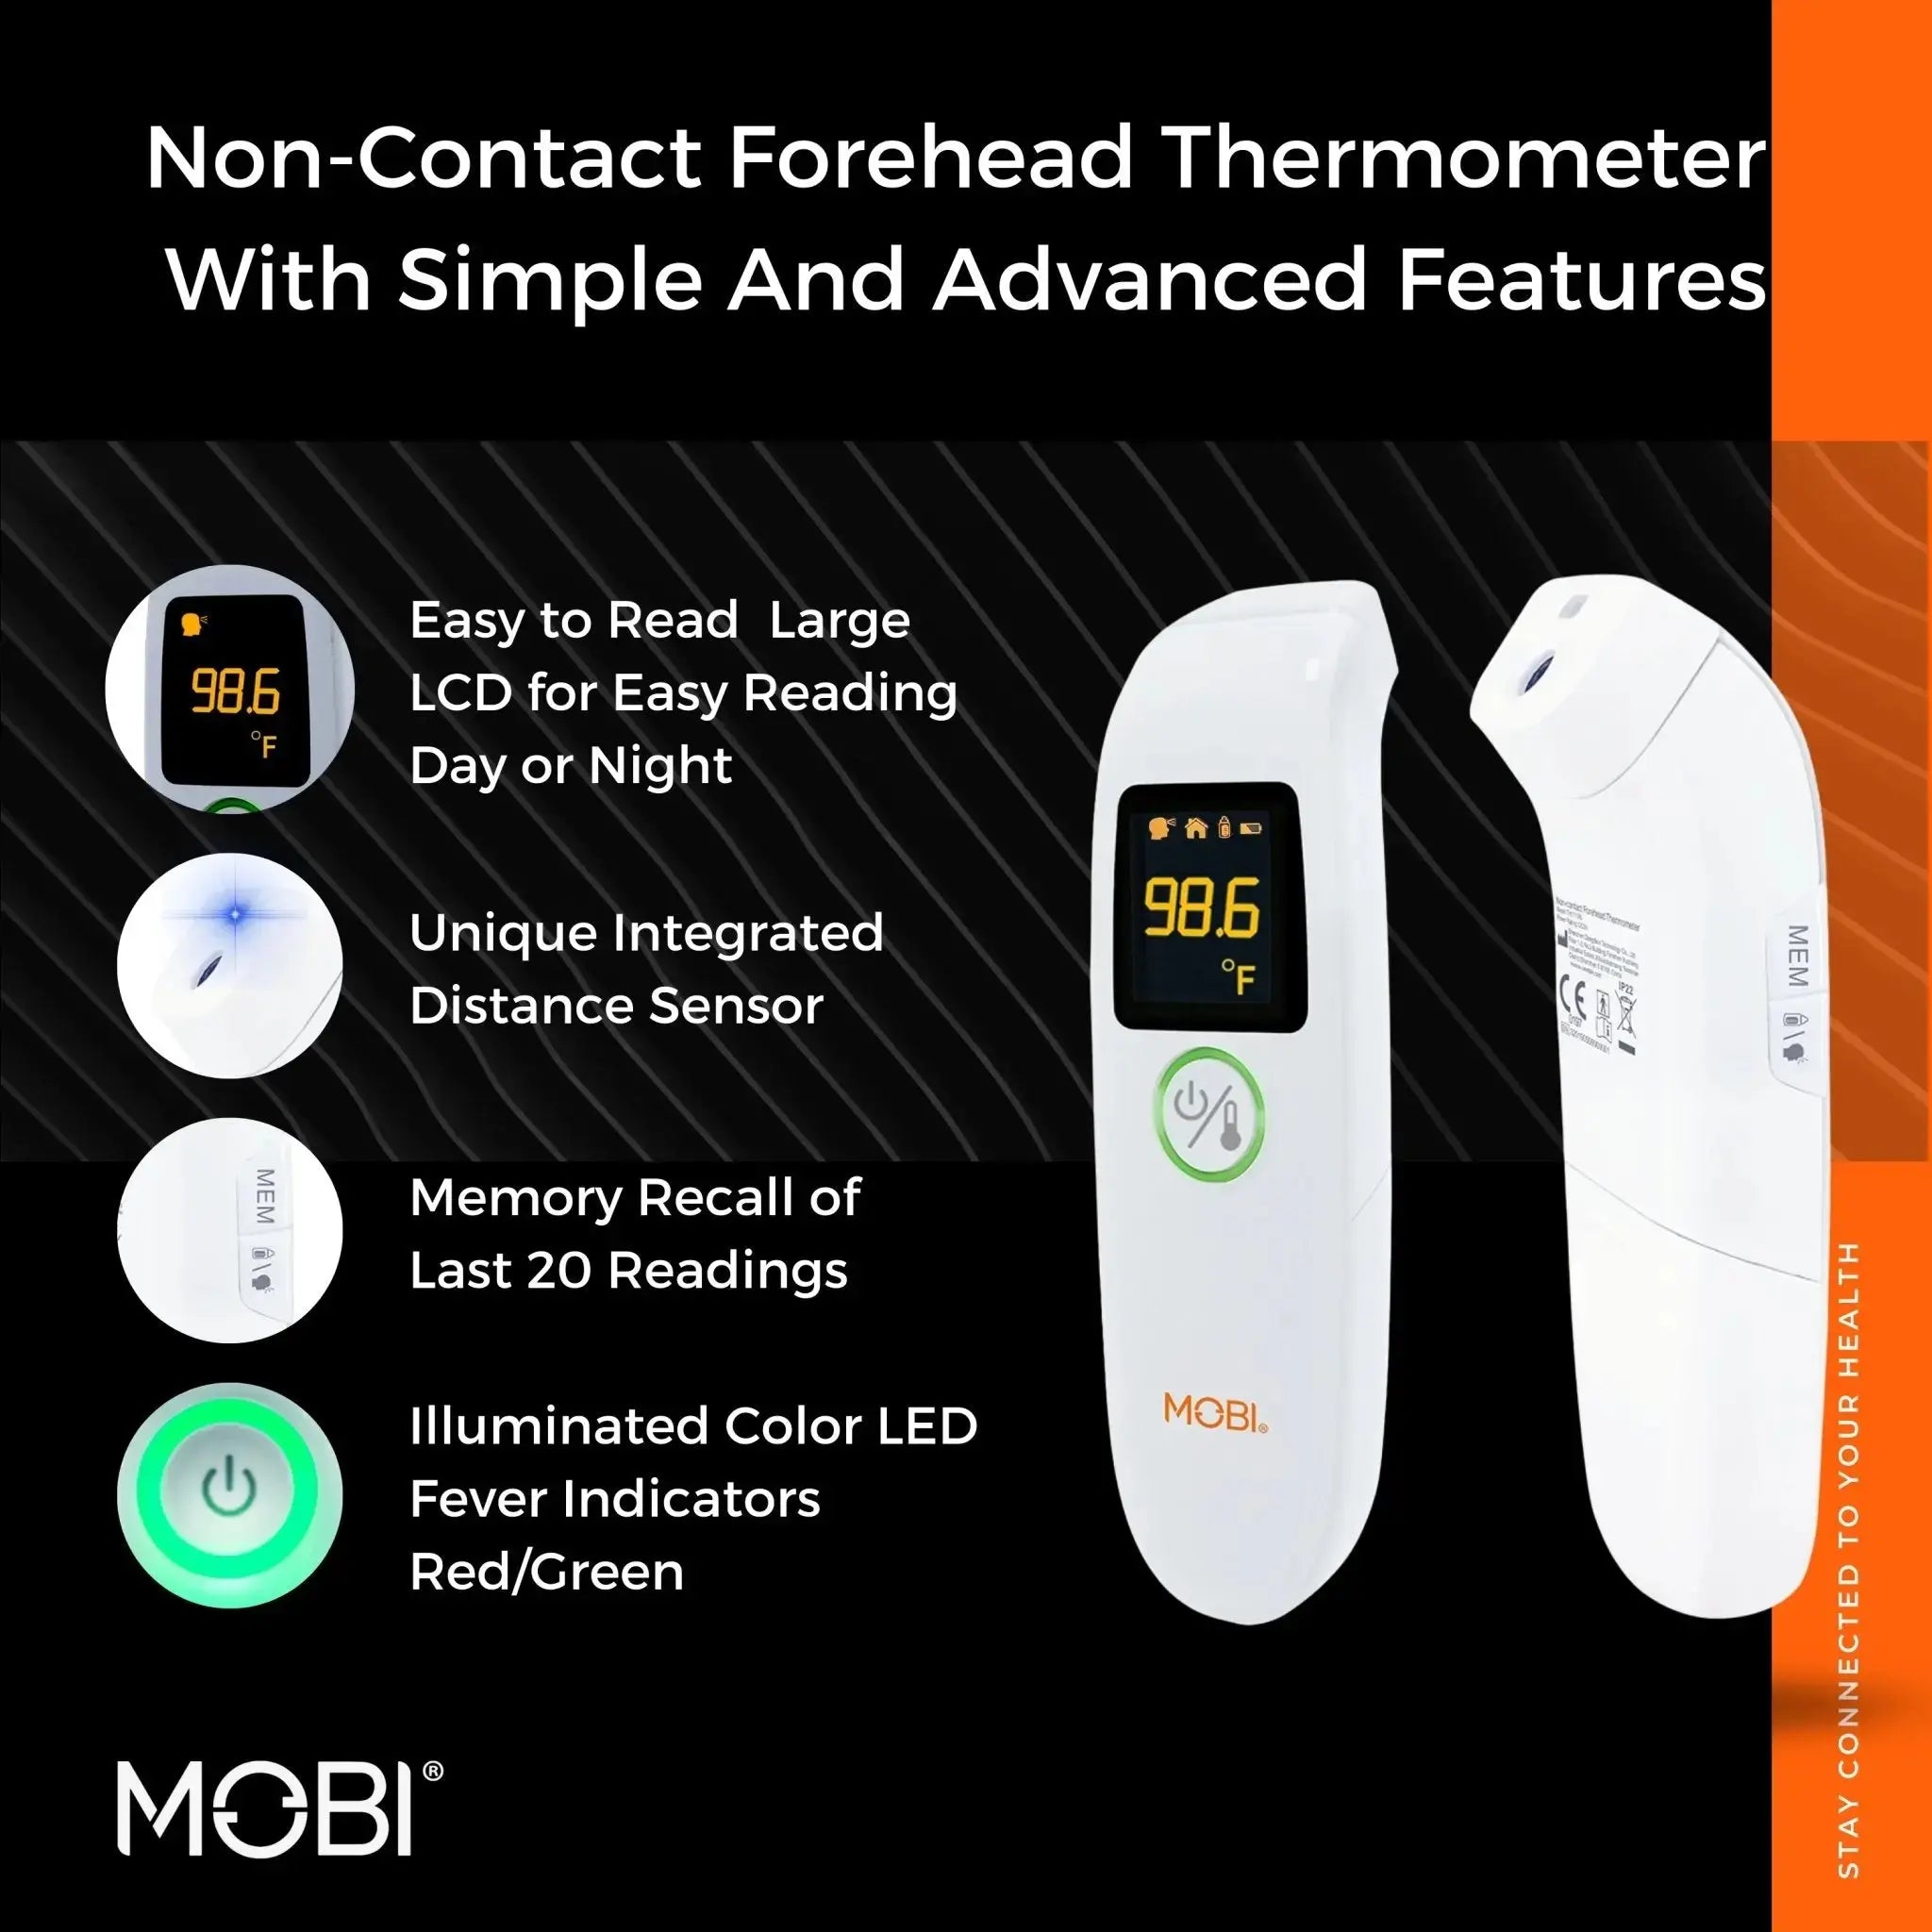 Digital LCD Industrial Electronic Thermometer Non Contact Infrared